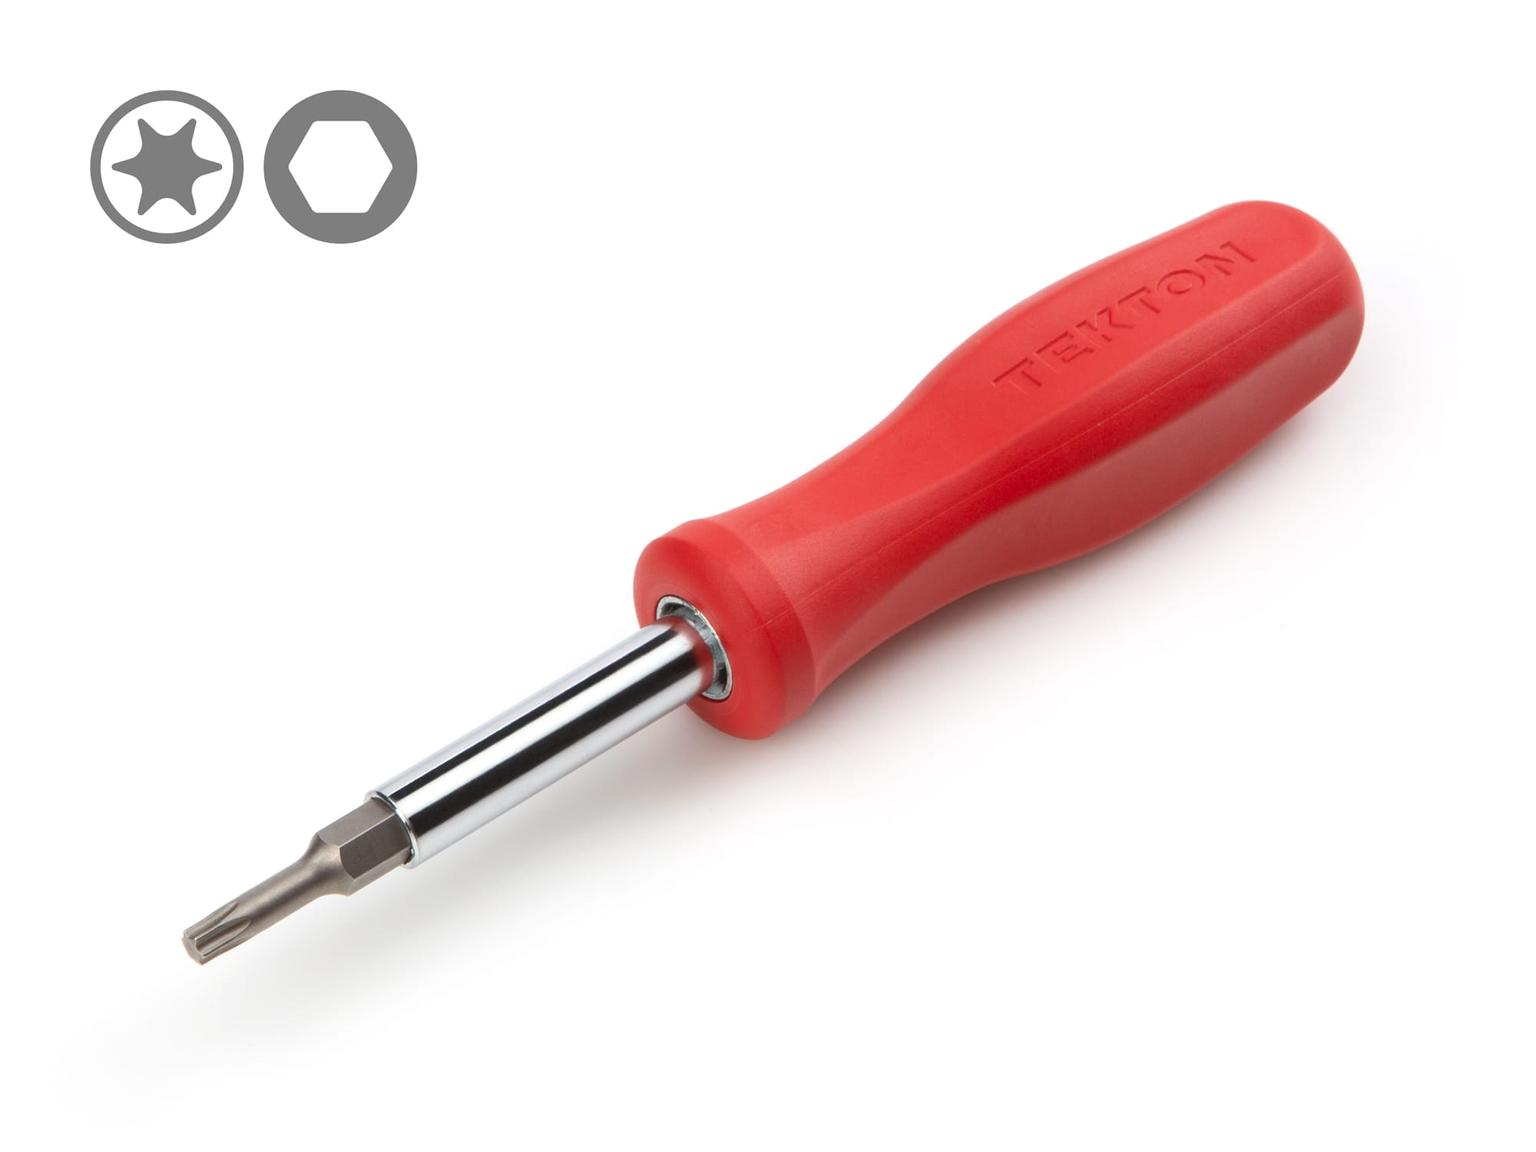 6-in-1 Torx Driver (Red)